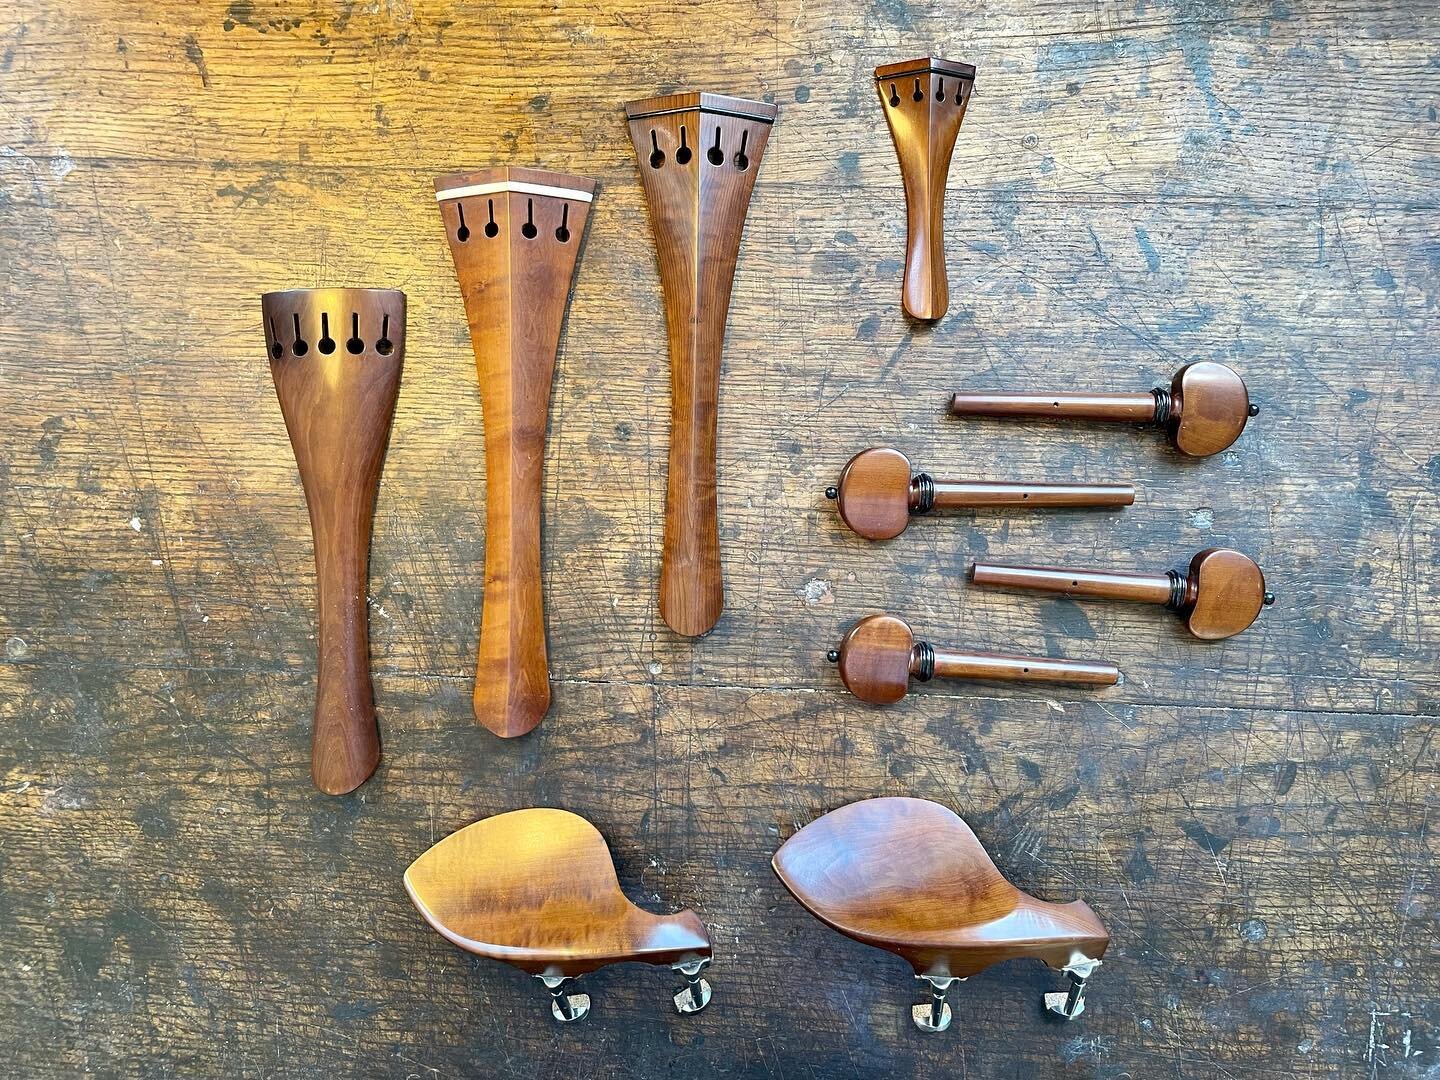 A selection of the world&rsquo;s finest bespoke boxwood fittings by Gerald Crowson &amp; Alexander Accessories ready for the finest instruments. Handmade in England.

Featuring: Pentachord cello tailpiece, custom Chan model super light cello tailpiec